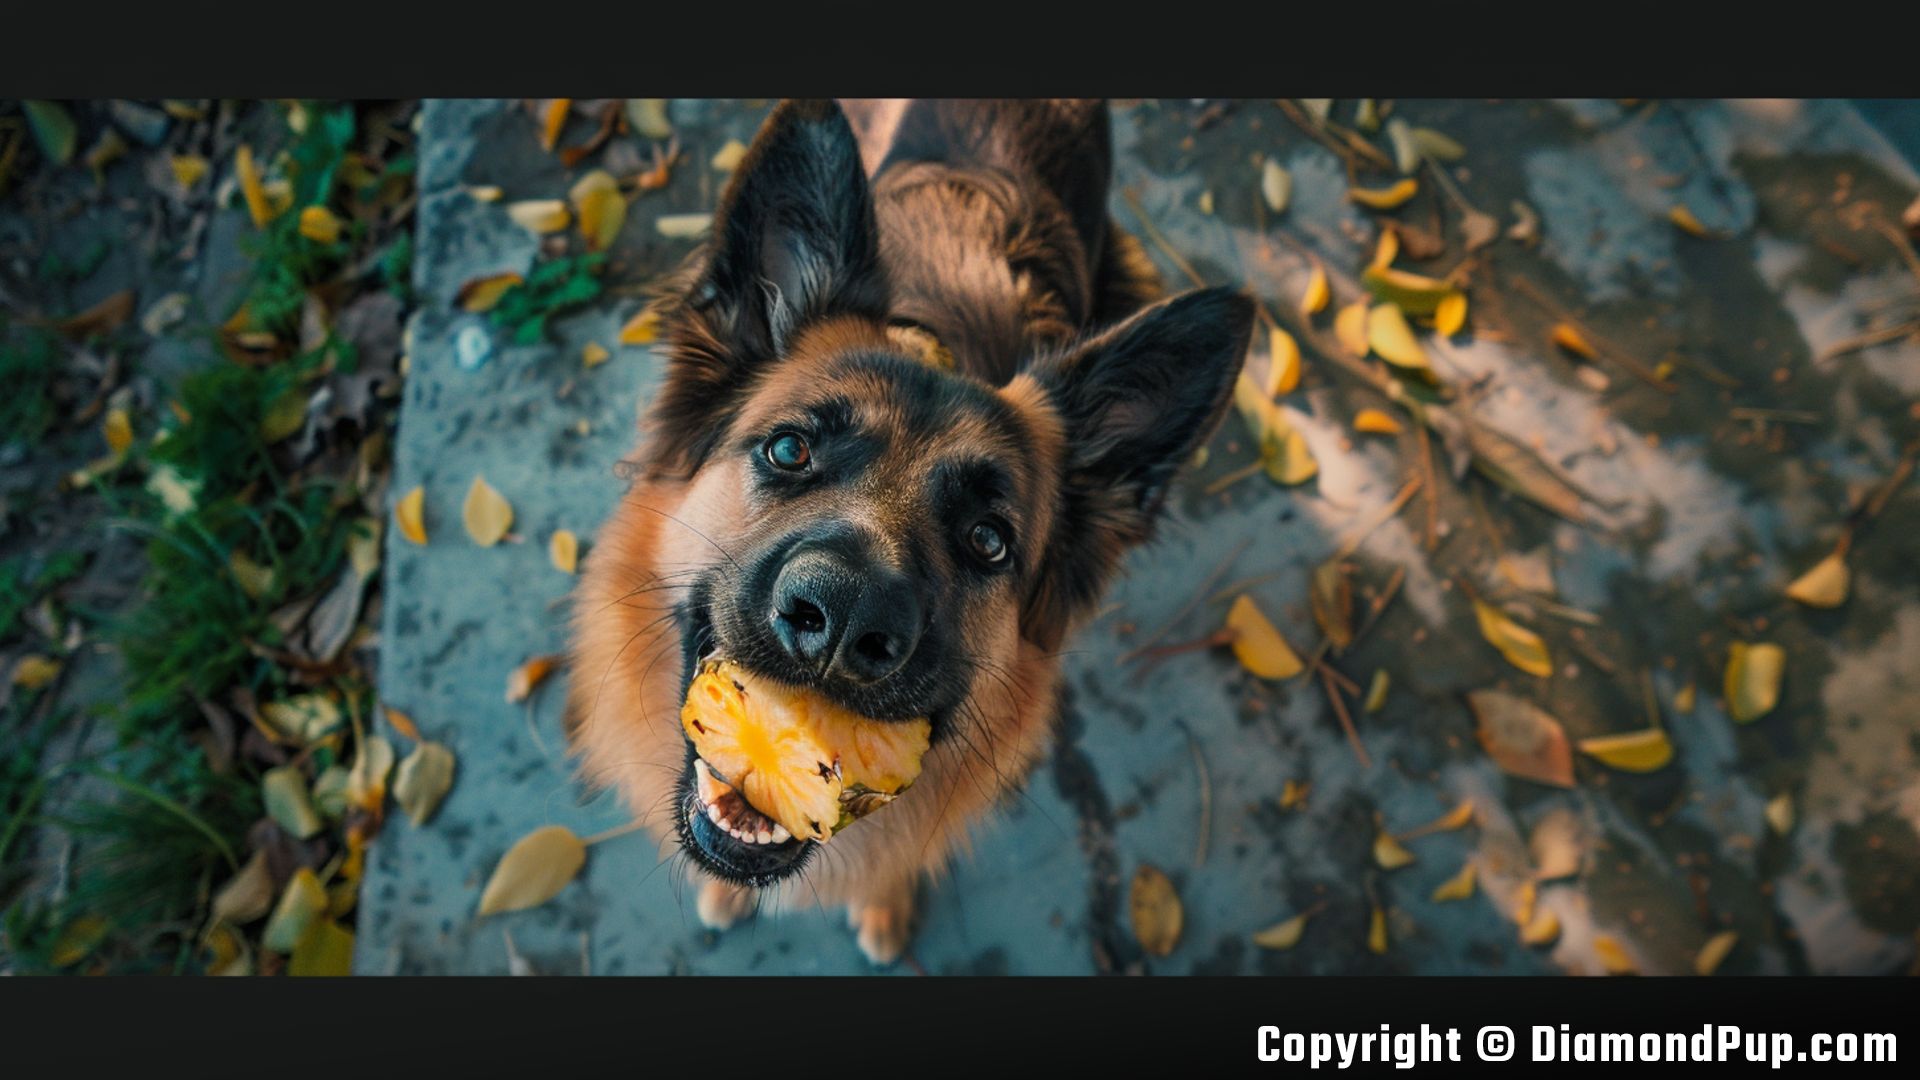 Photograph of a Cute German Shepherd Snacking on Pineapple